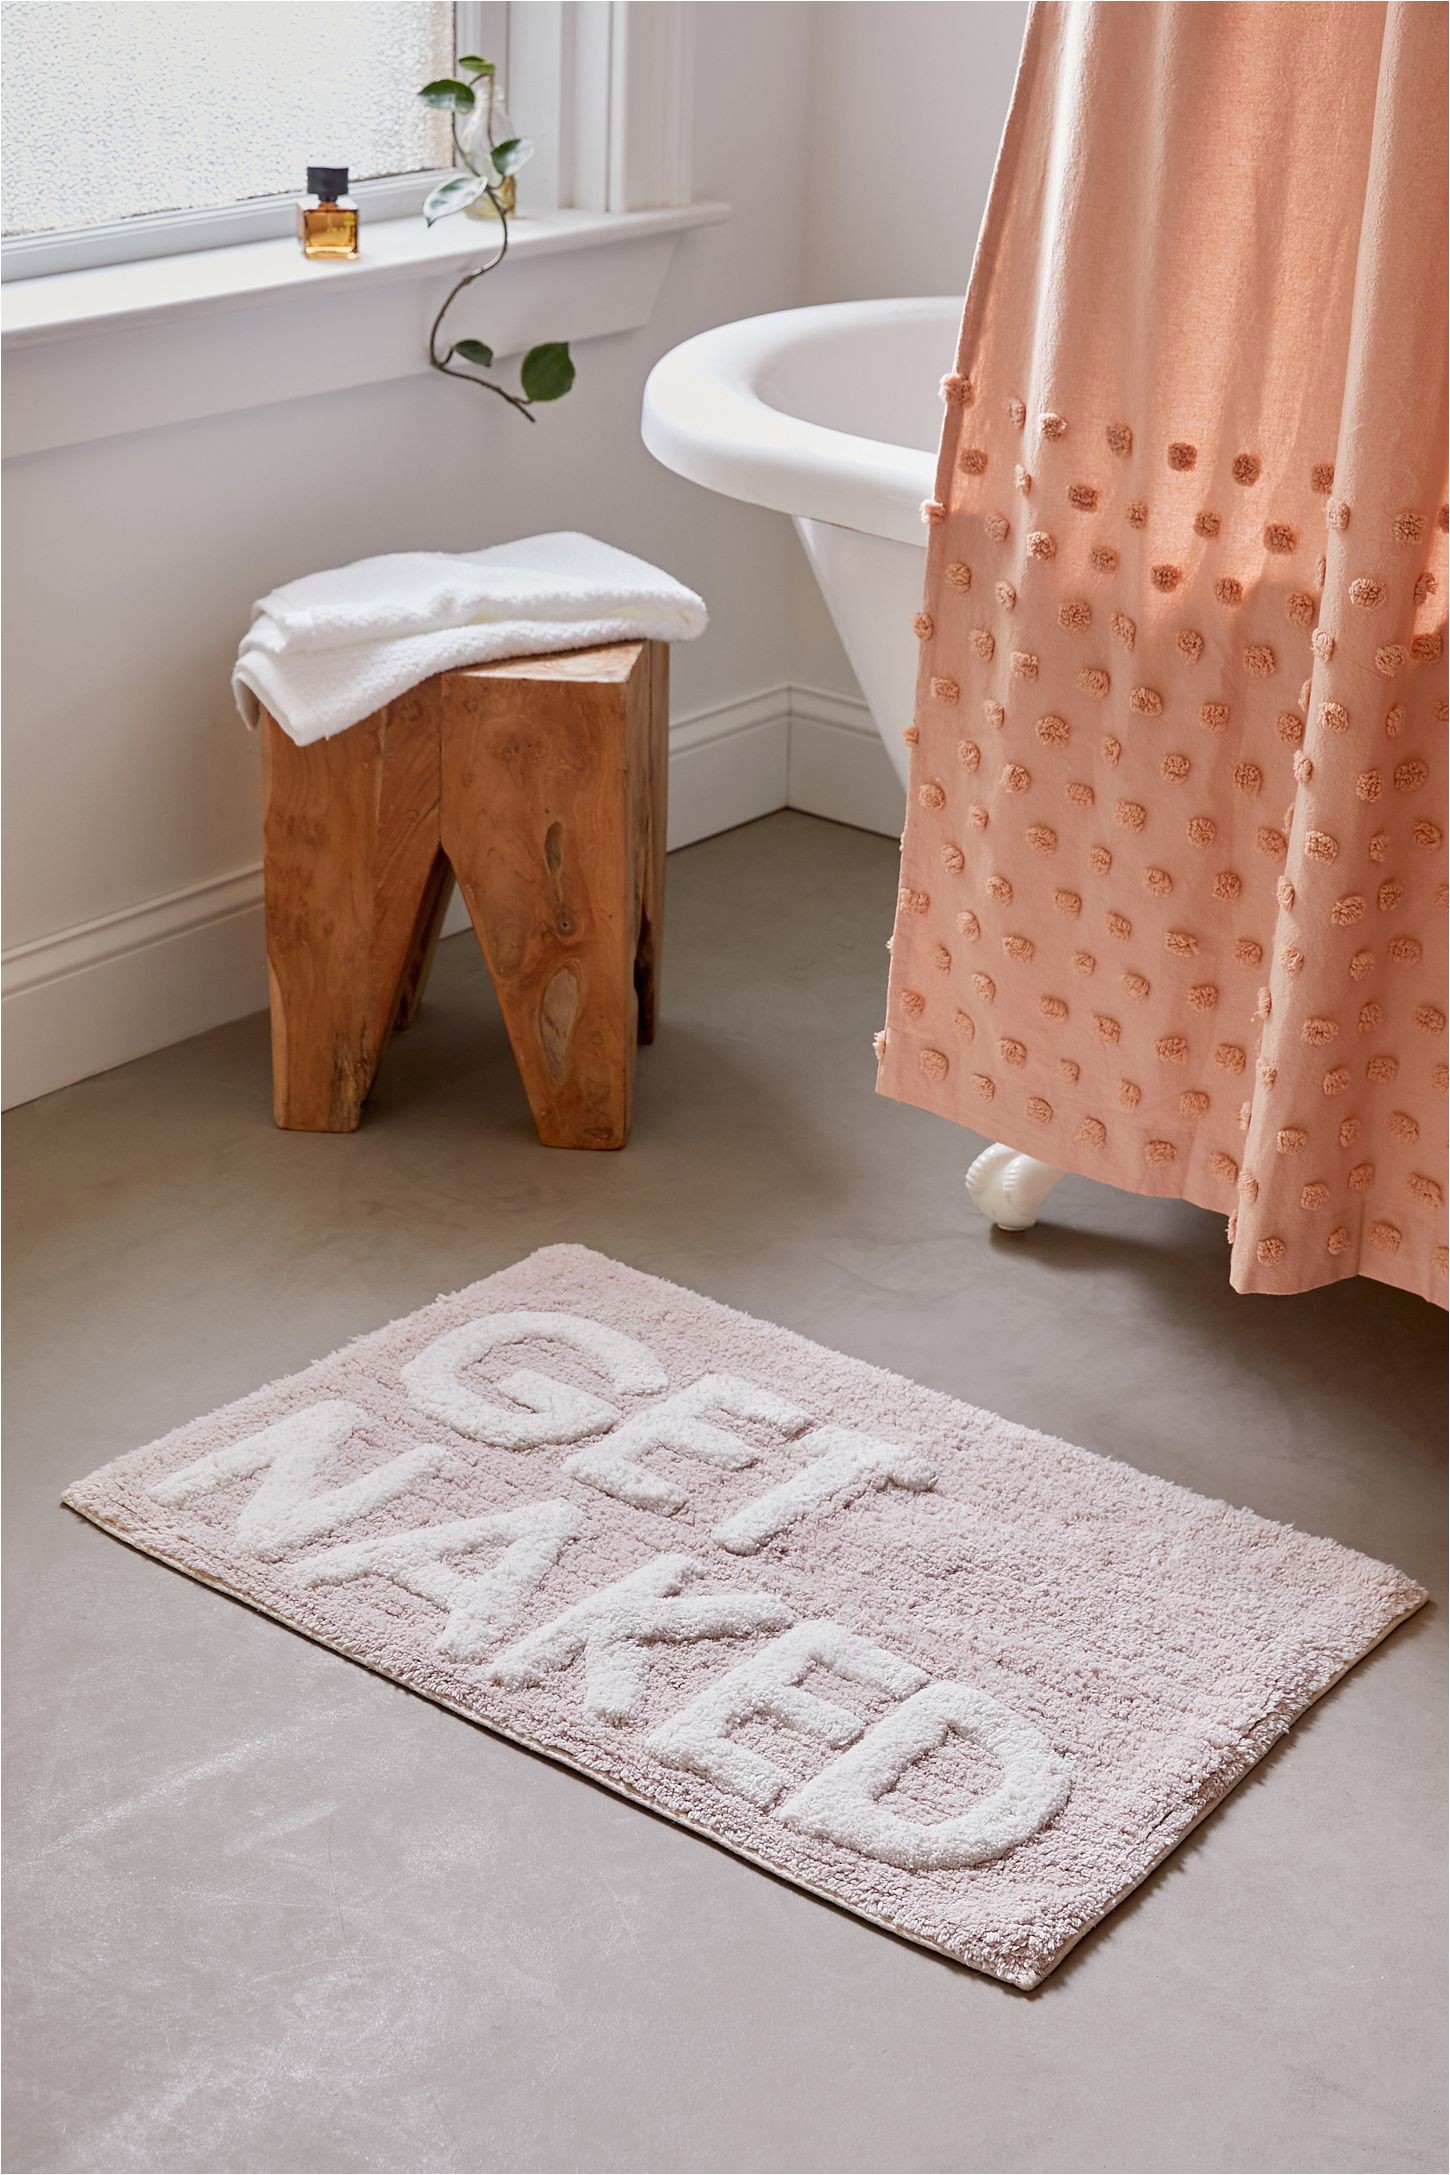 Small Bathroom Rugs and Mats Pin On Room Stuff